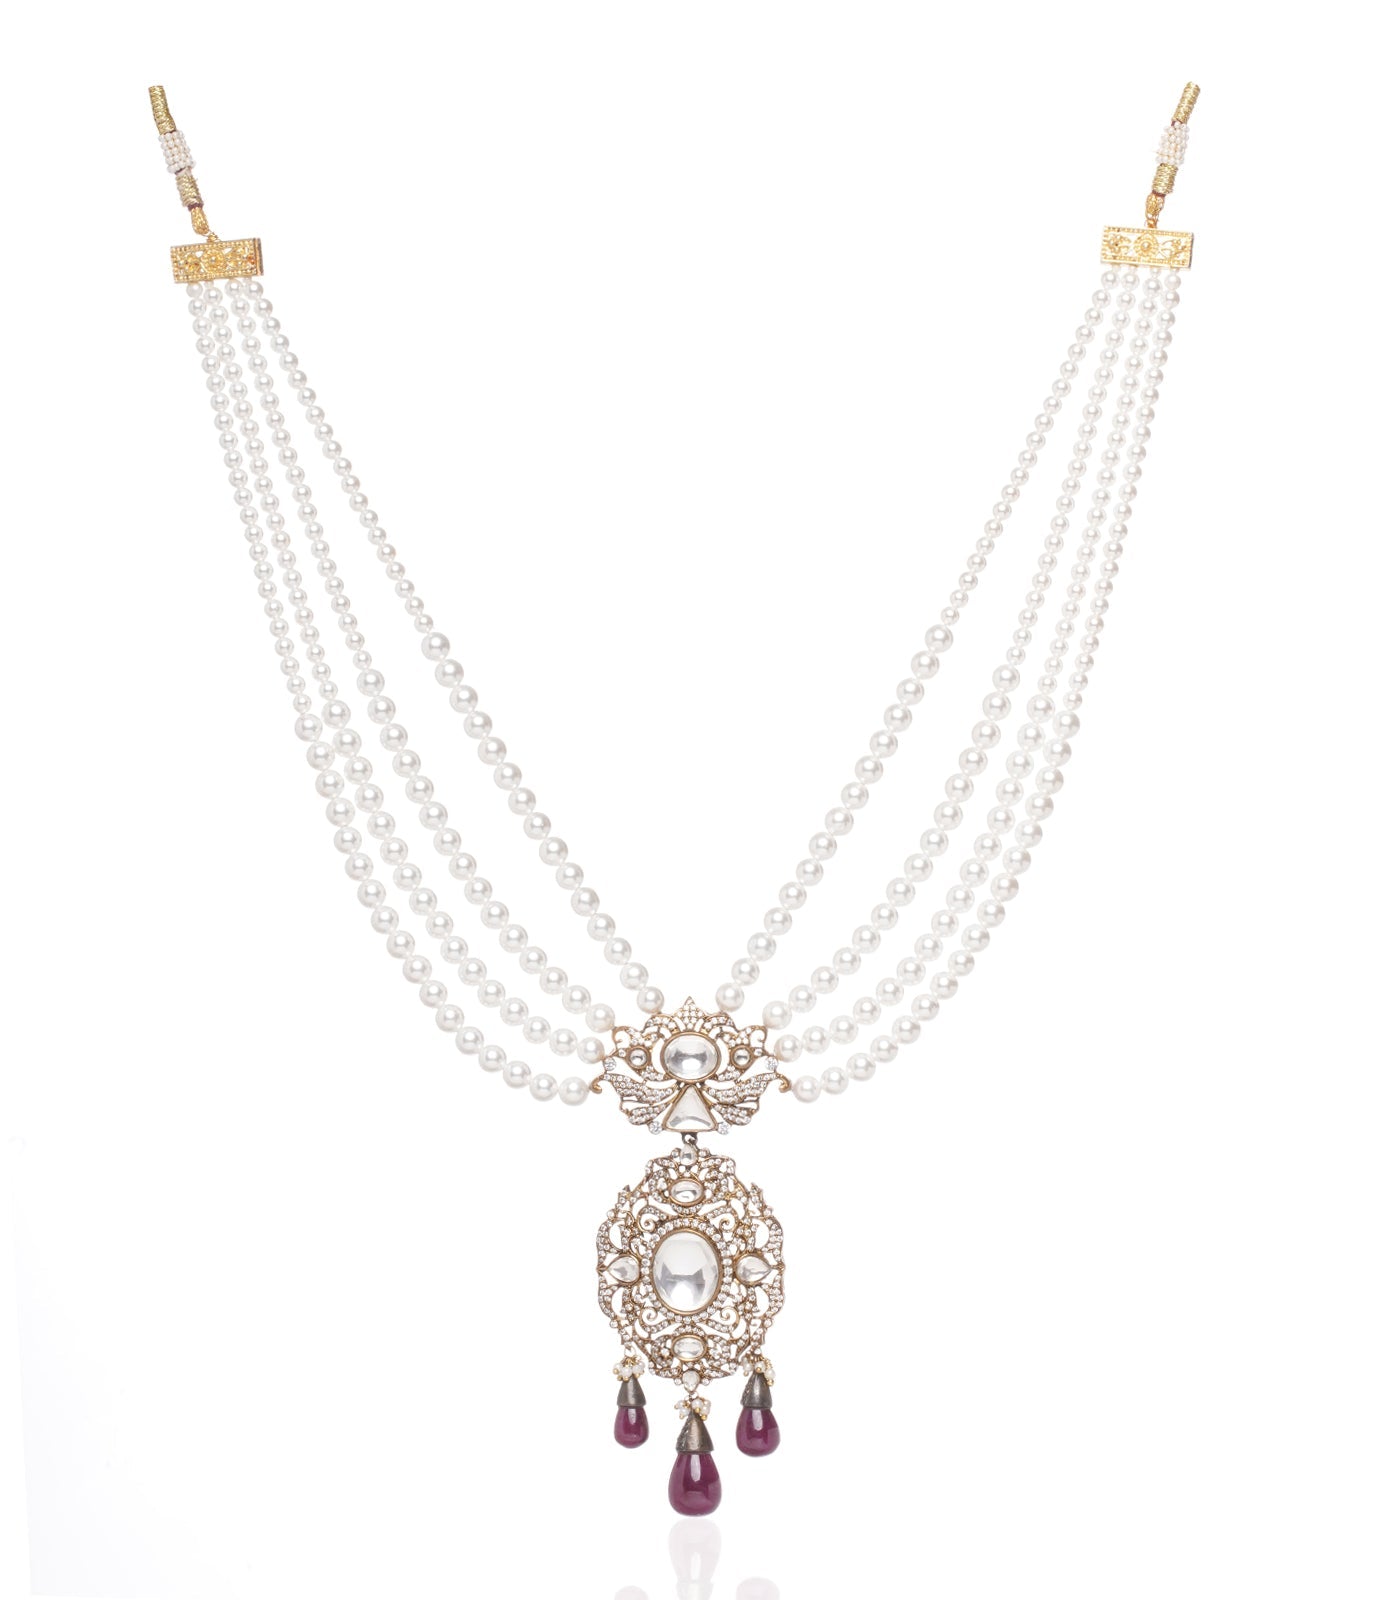 Preeti Mohan - Chandni Gold Plated Polki Pendant With Ruby & Pearls